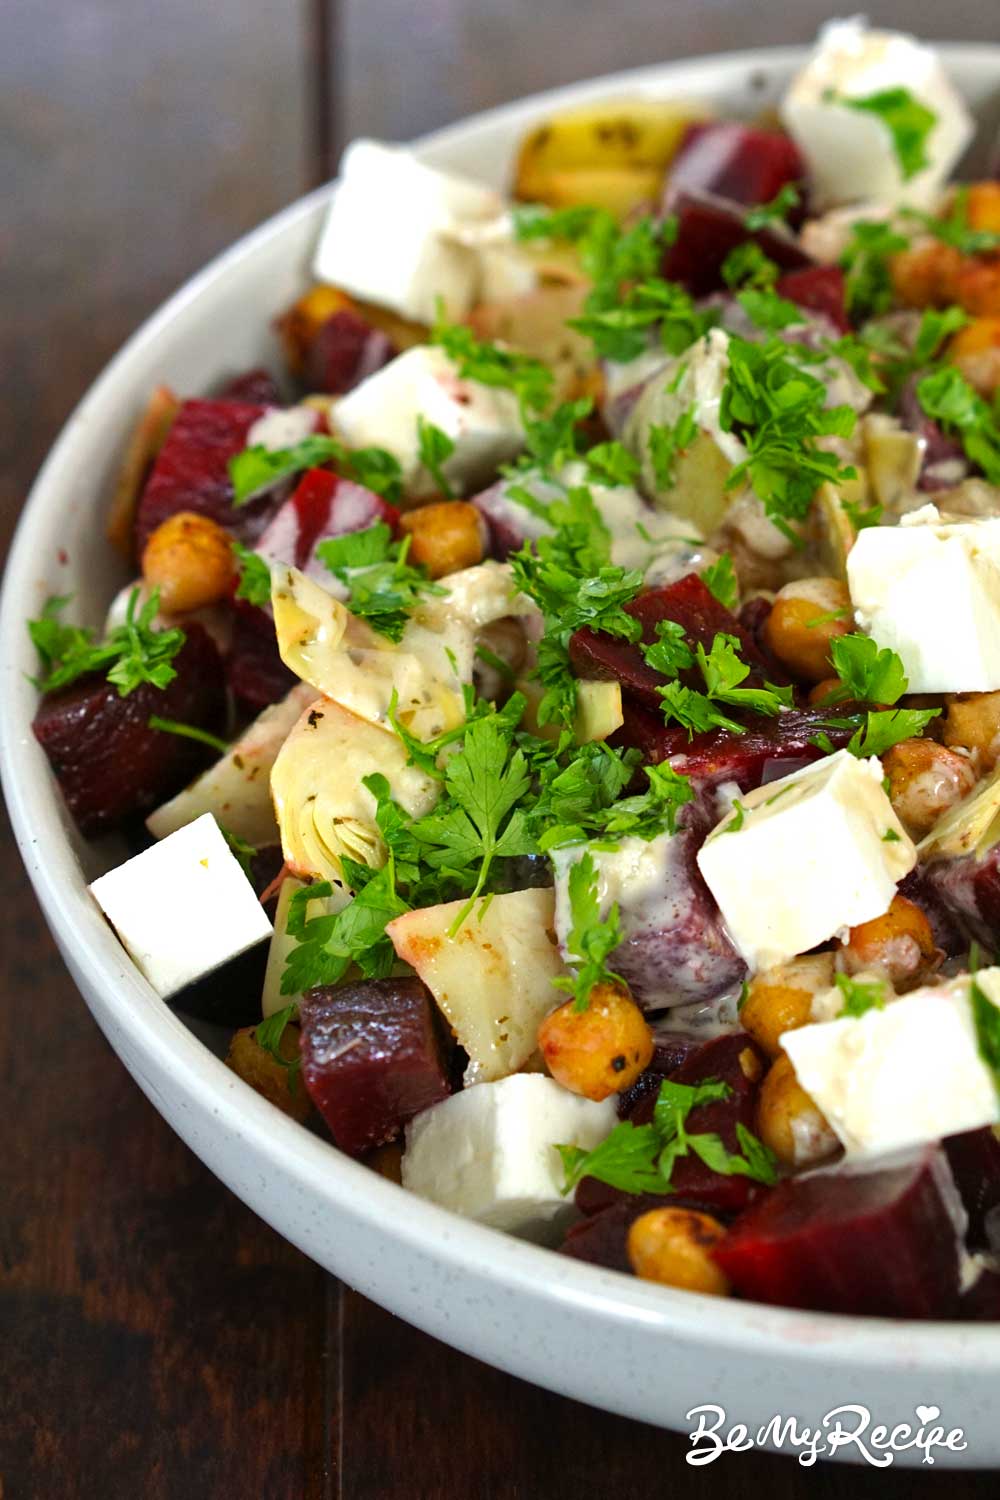 Easy Beet Salad Recipe with Chickpeas, Feta, and Artichokes